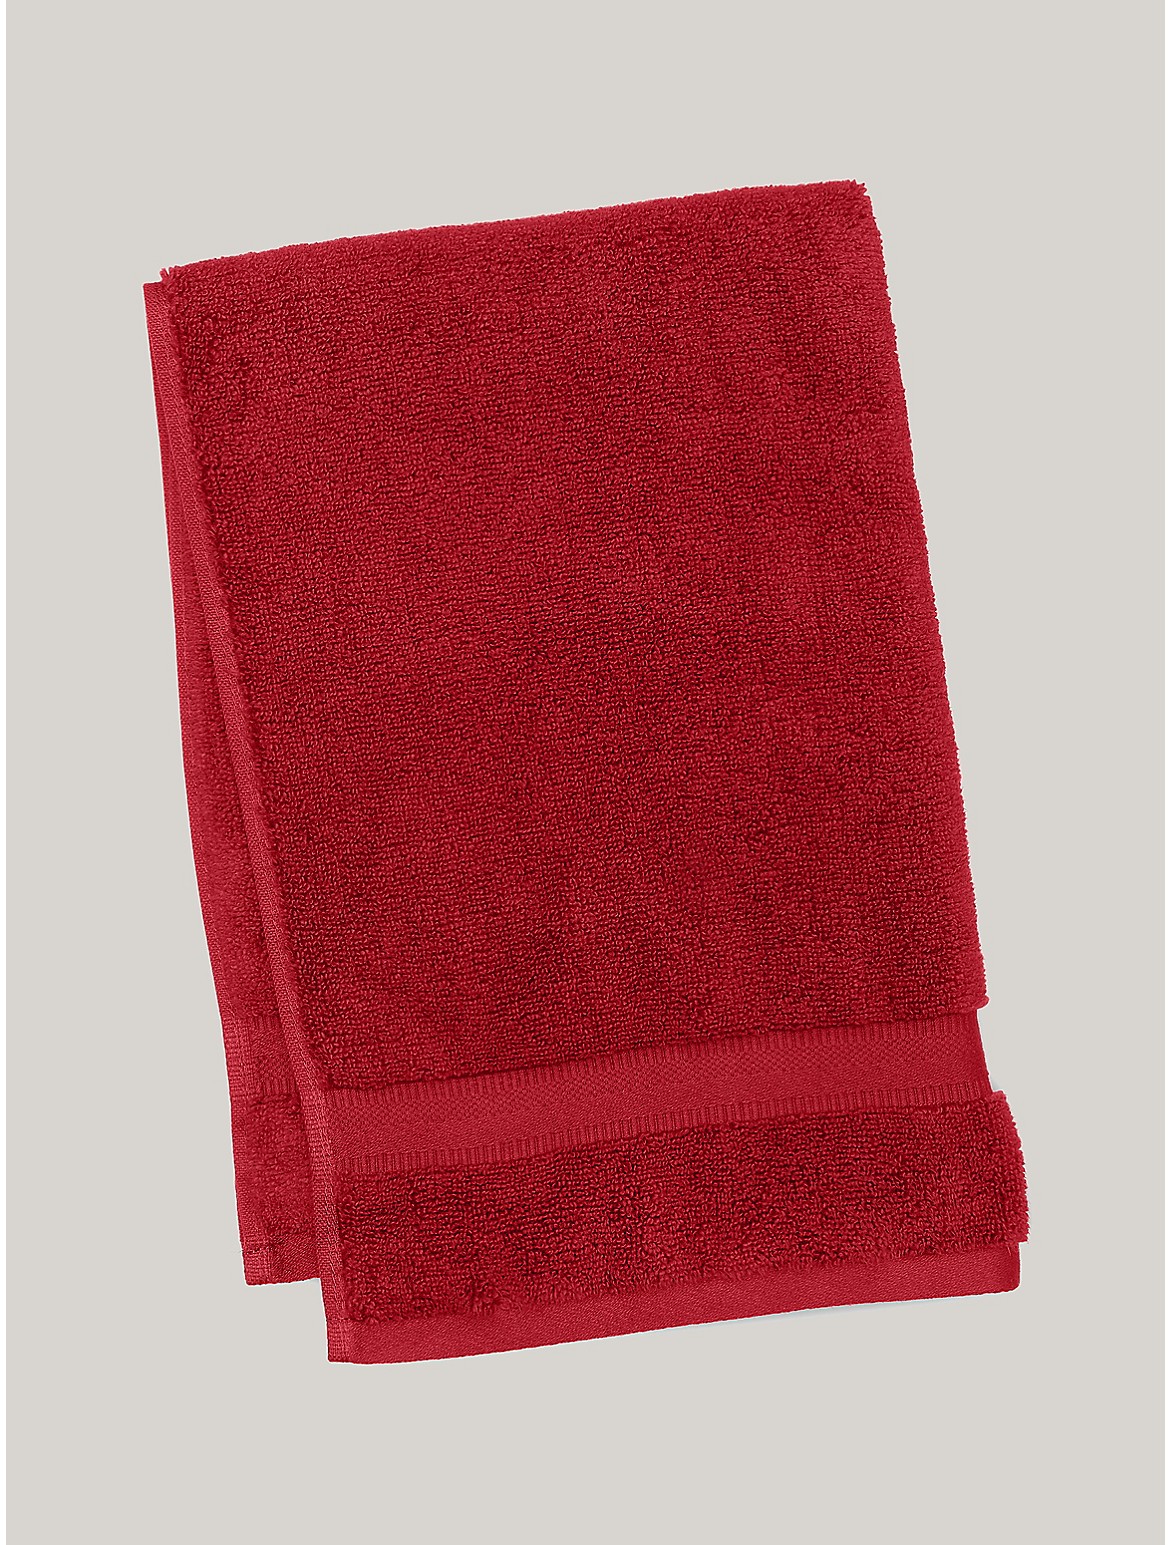 Tommy Hilfiger Signature Solid Hand Towel in Biking Red - Red